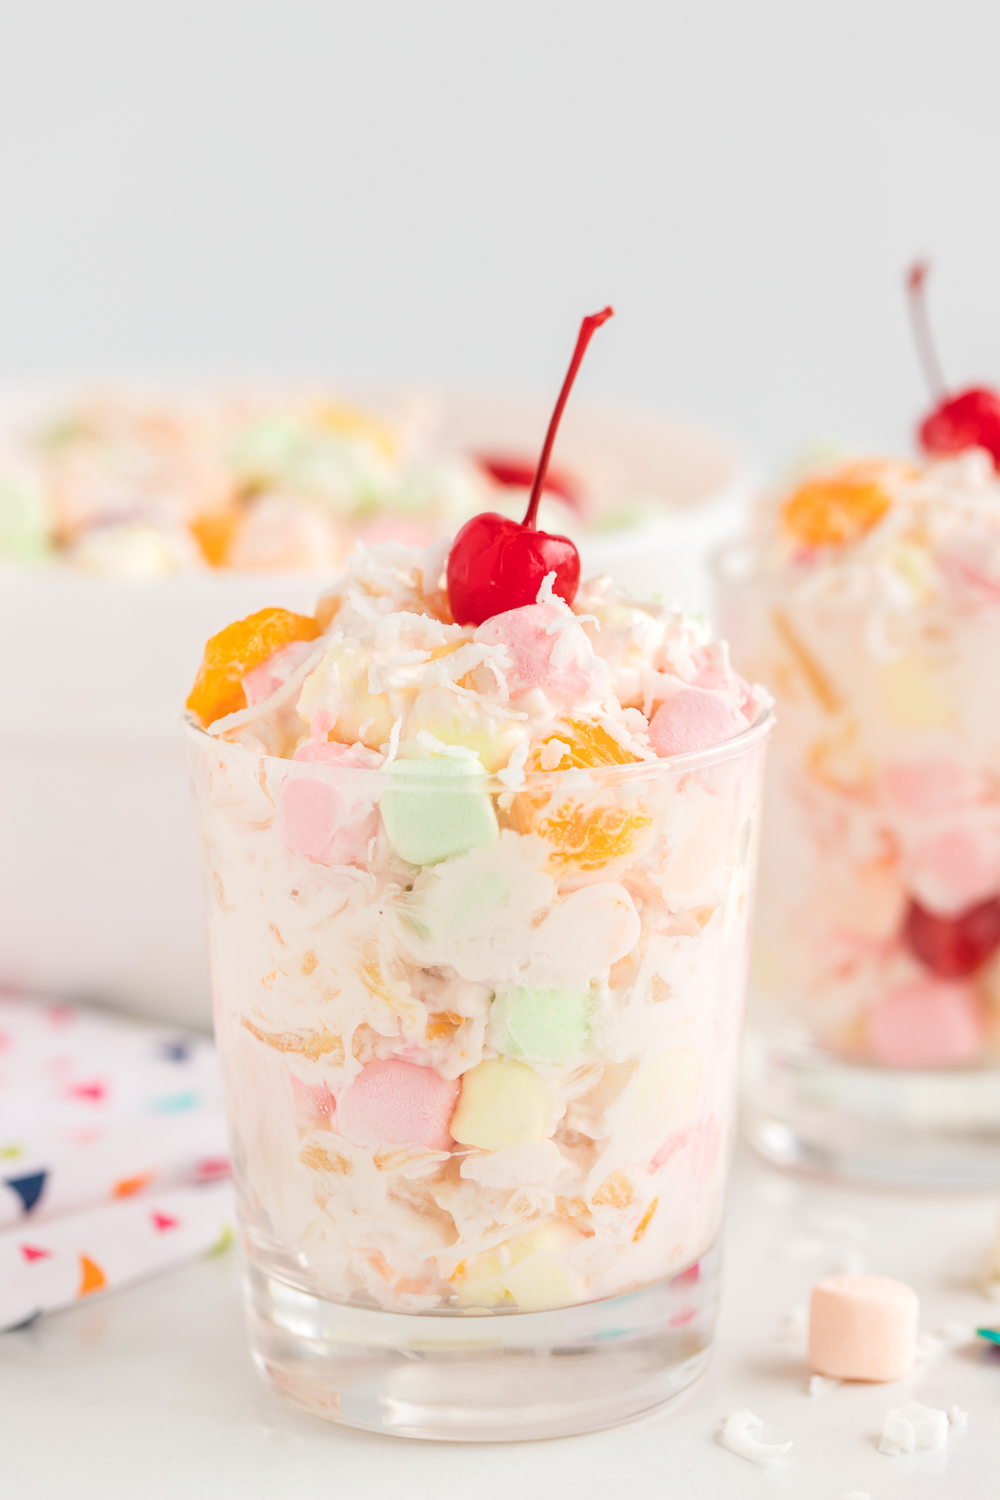 Ambrosia Fruit Salad: a simple and delicious fruit salad that is combined with sweet whipped topping and sprinkled with shredded coconut. Great for large gatherings, picnics and more!